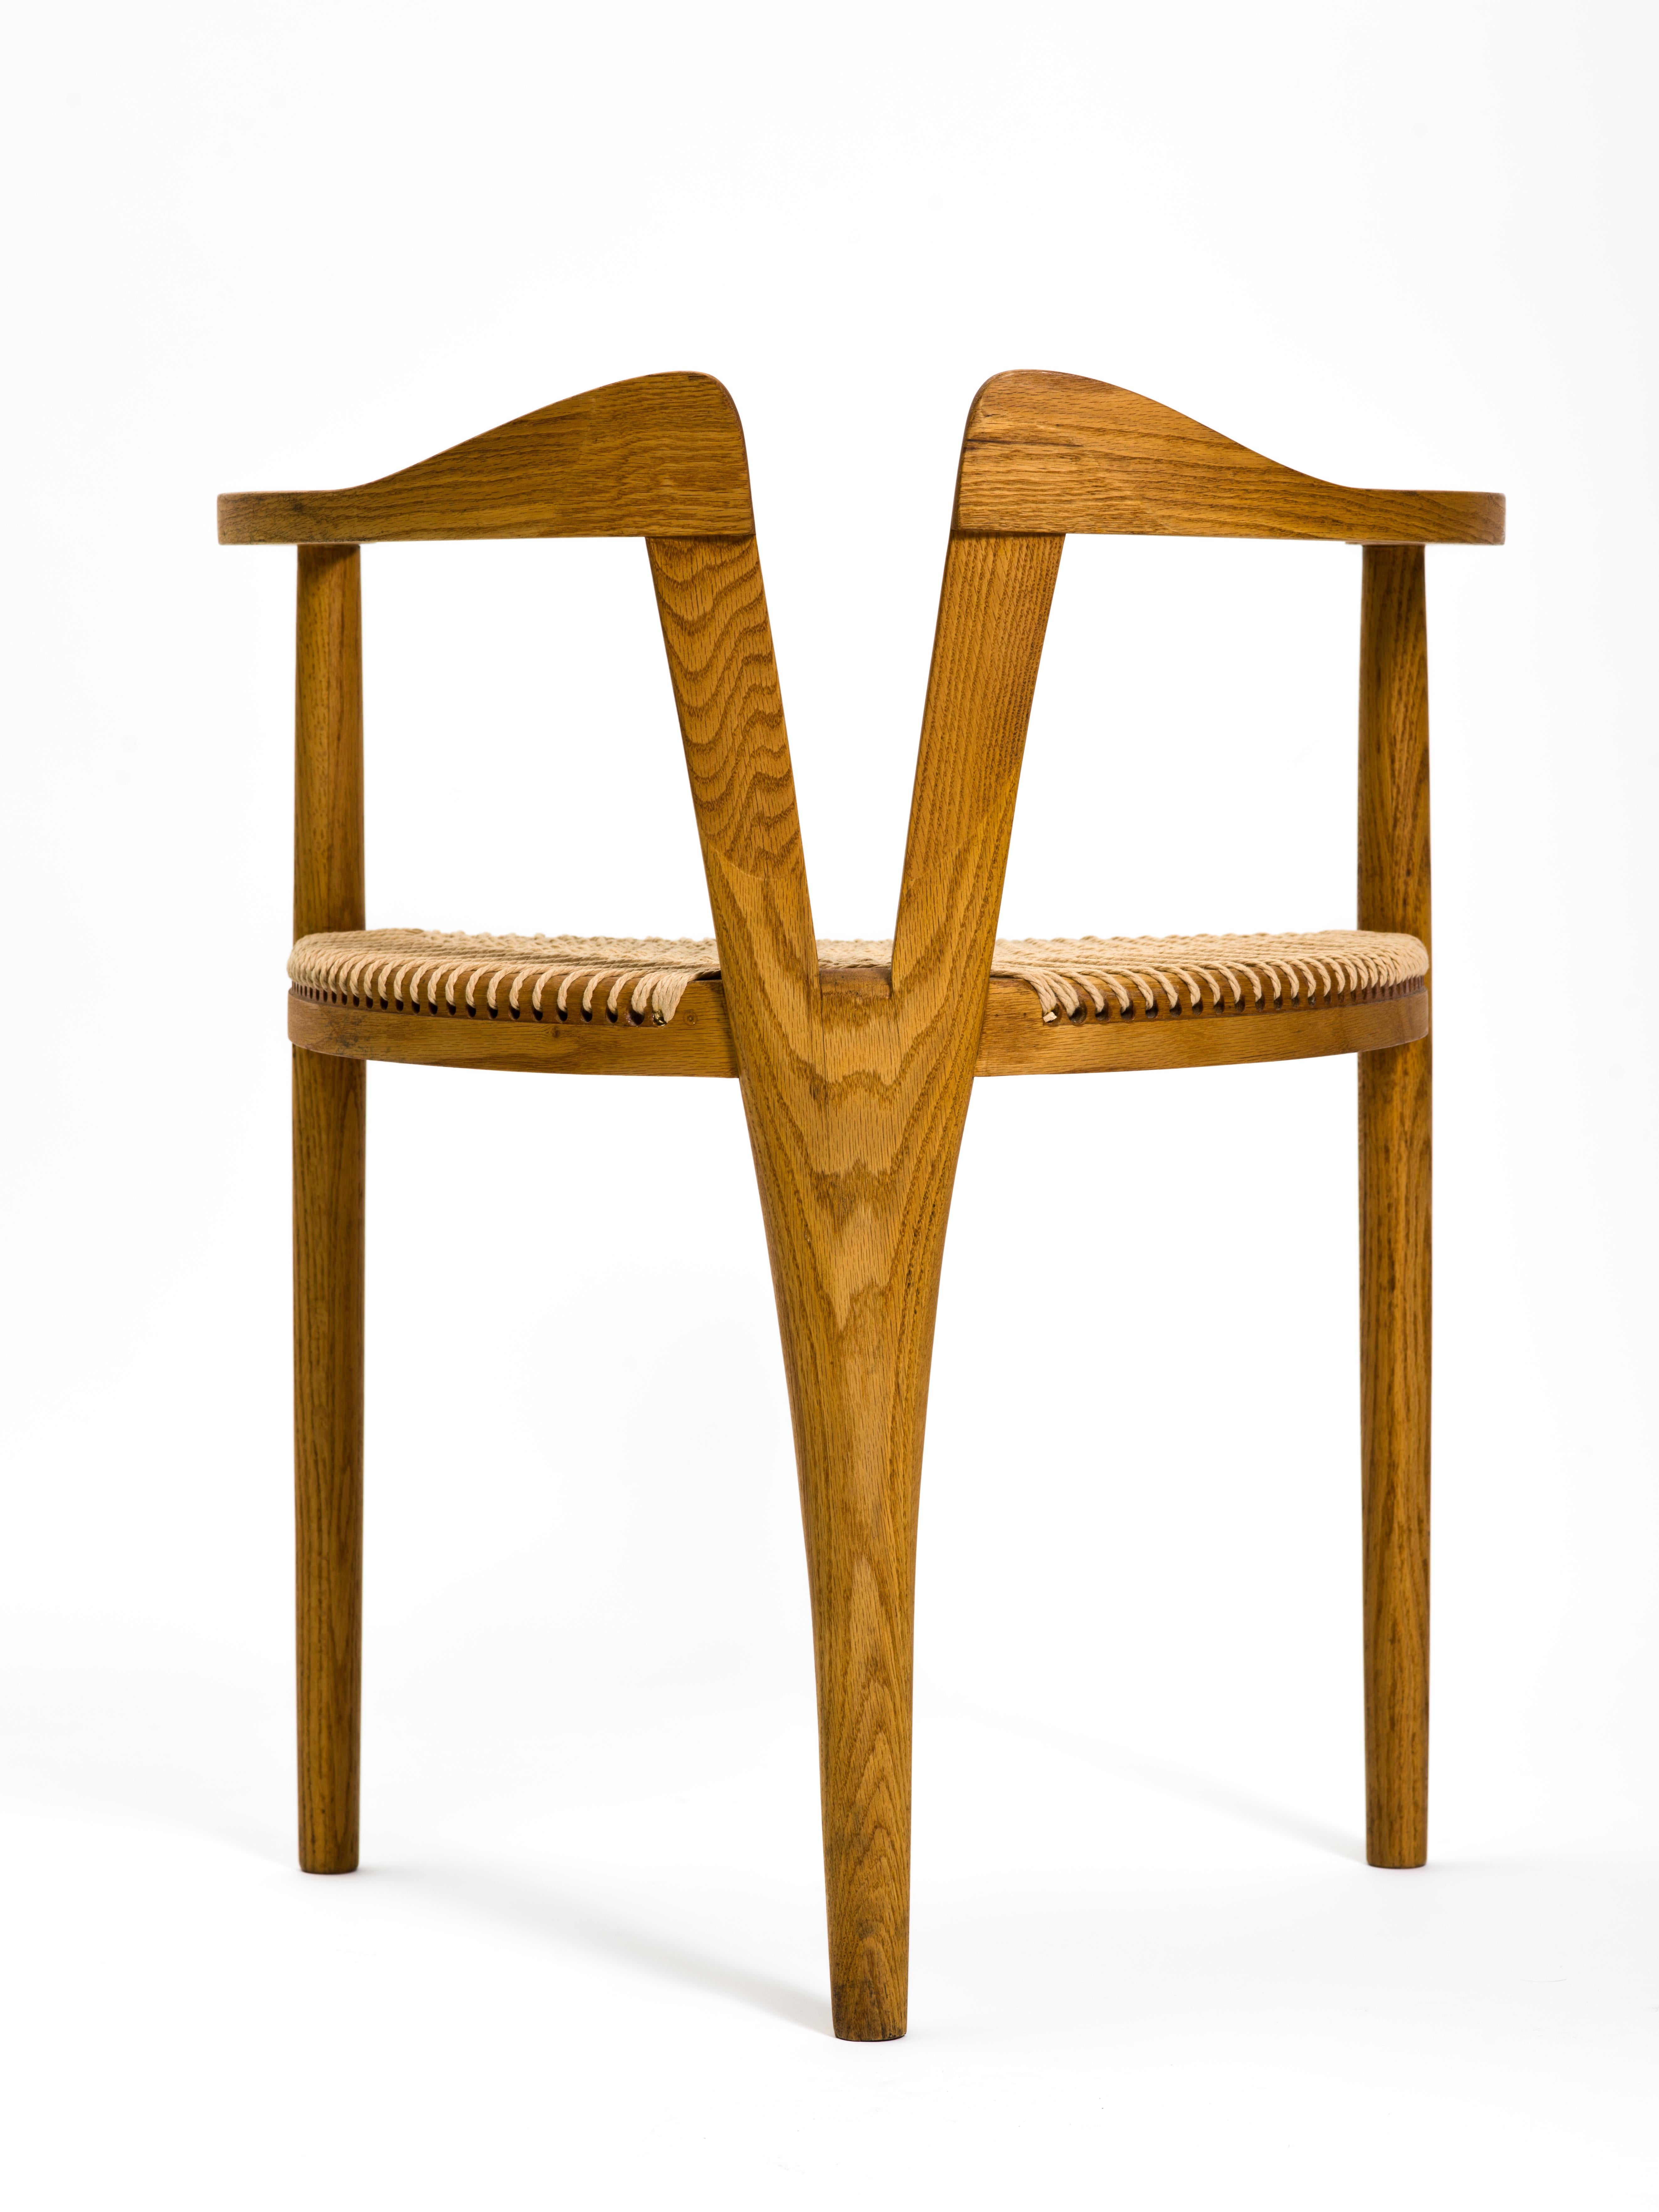 American Studio Craft Tri-Leg Chair in Oak with Woven Seat after Hans Wegner 4